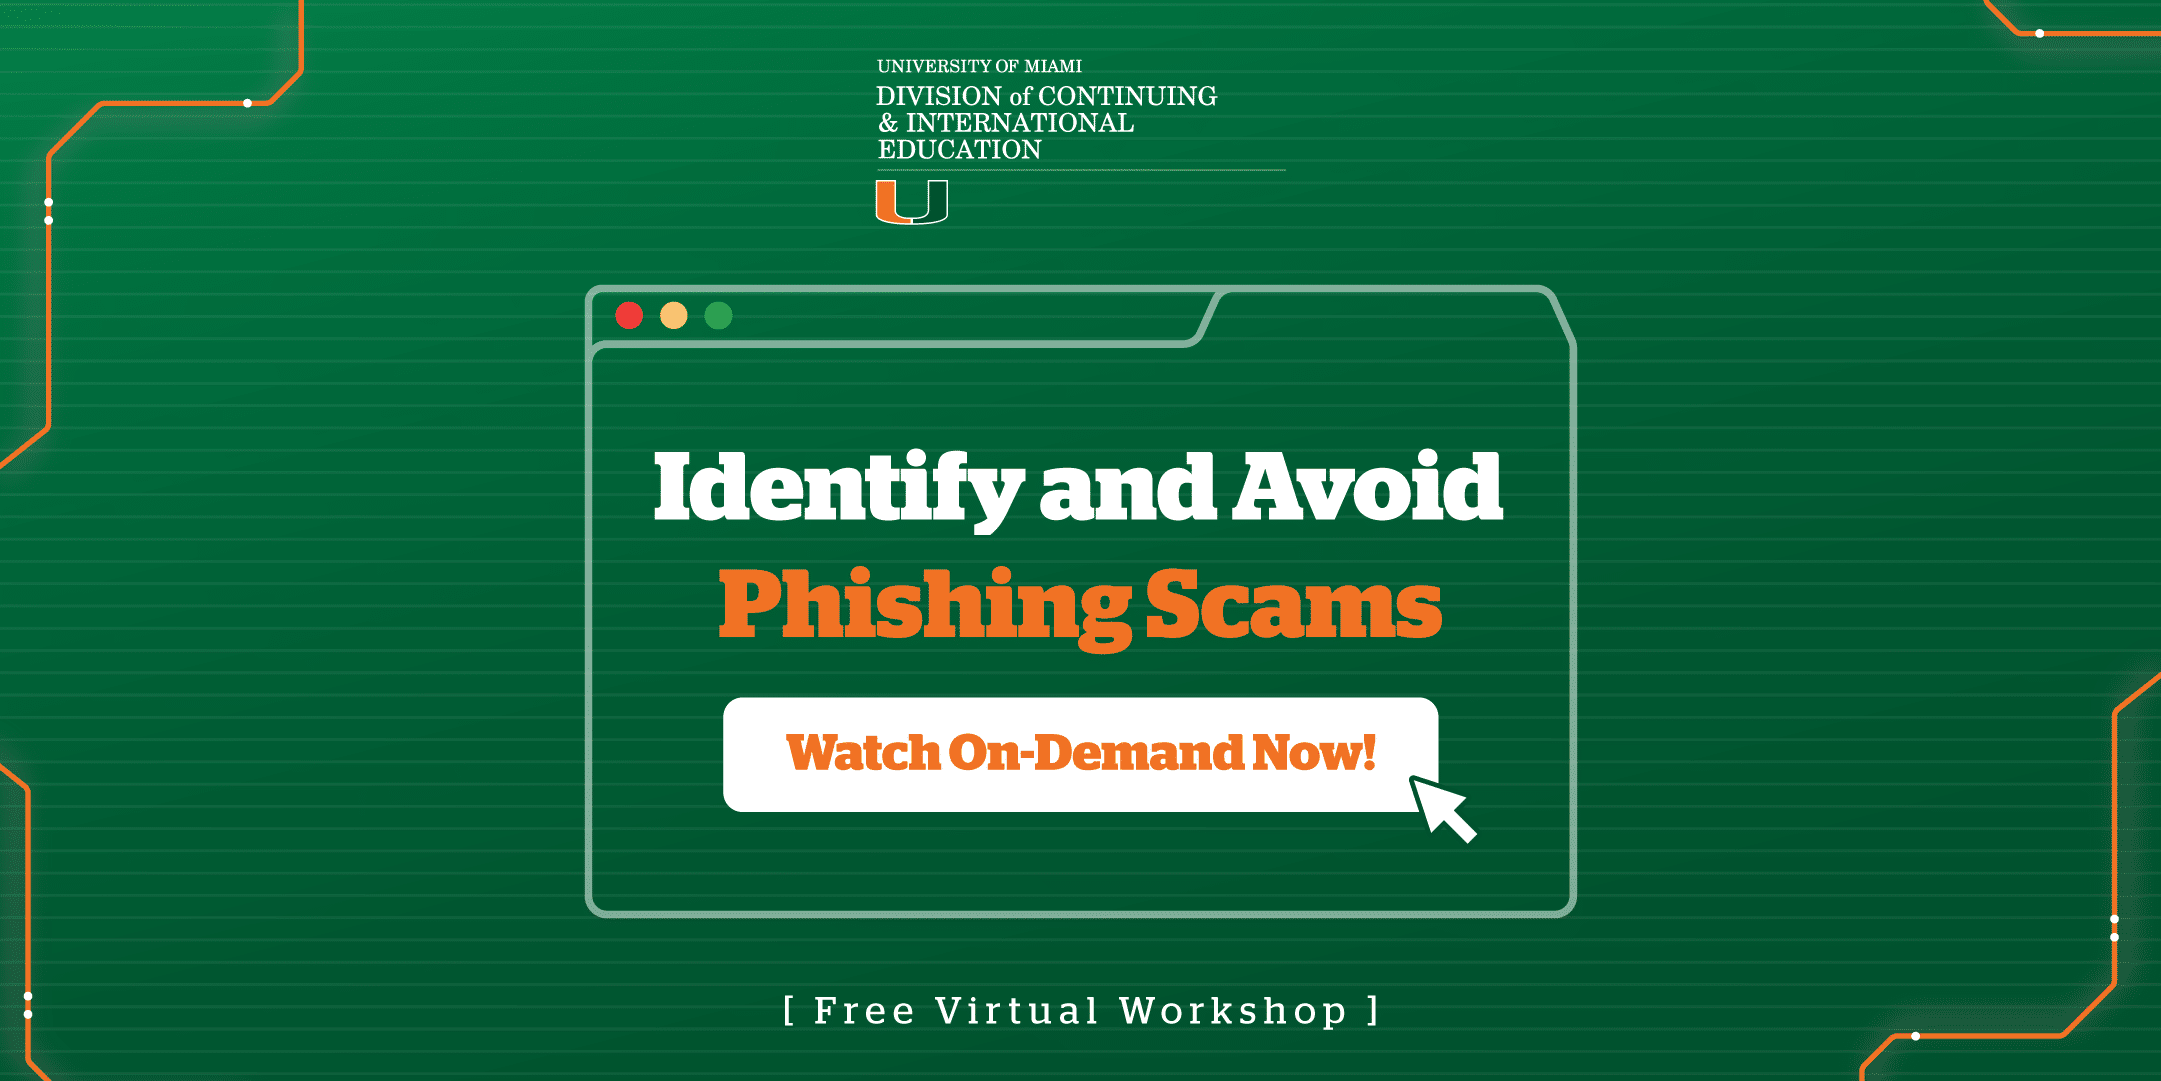  identify and avoid phishing scams workshop